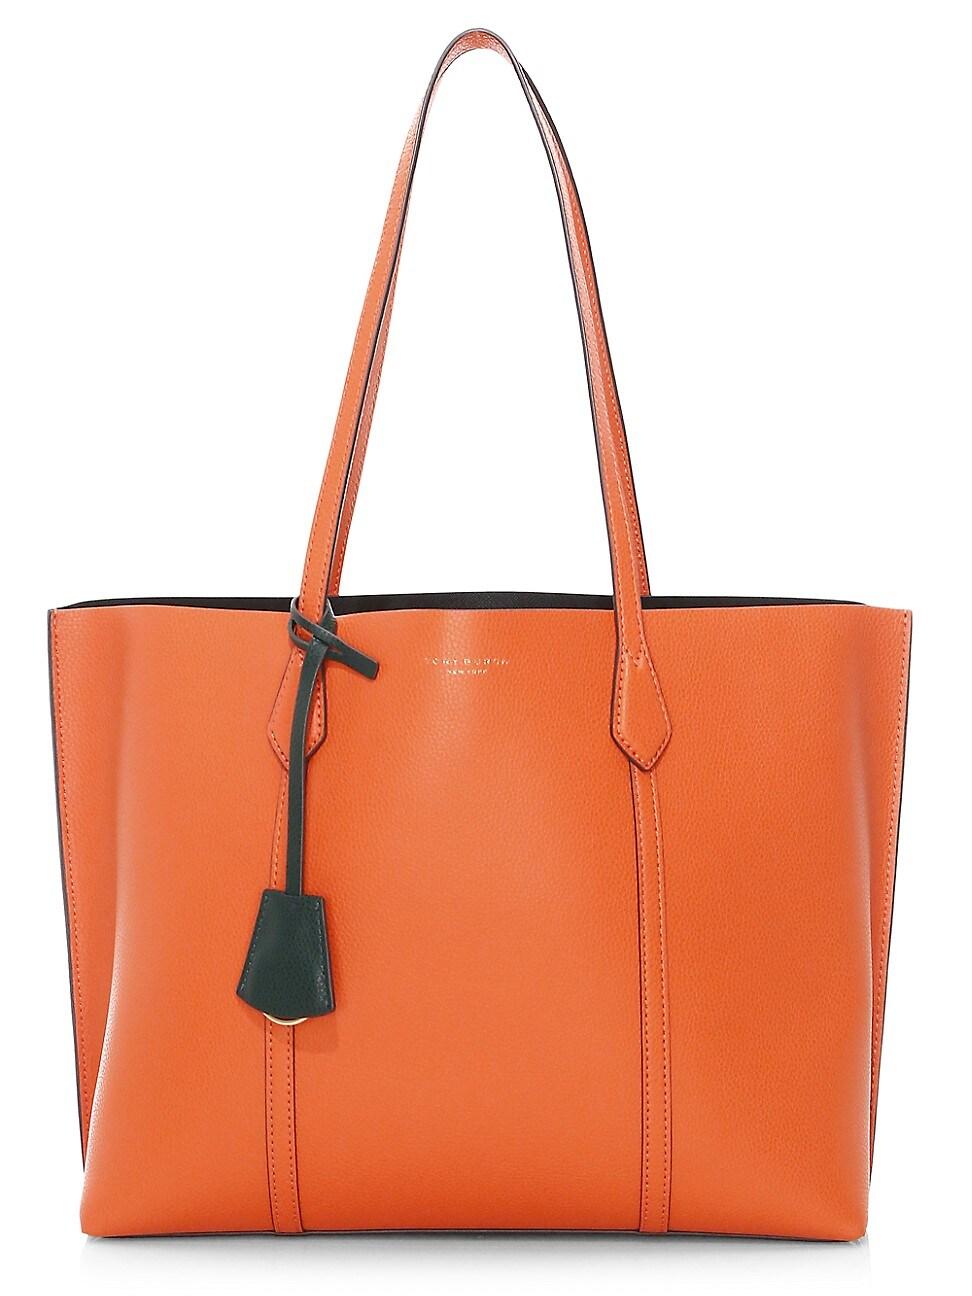 Tory Burch Perry Leather Tote Bag in Pink (Orange) - Lyst